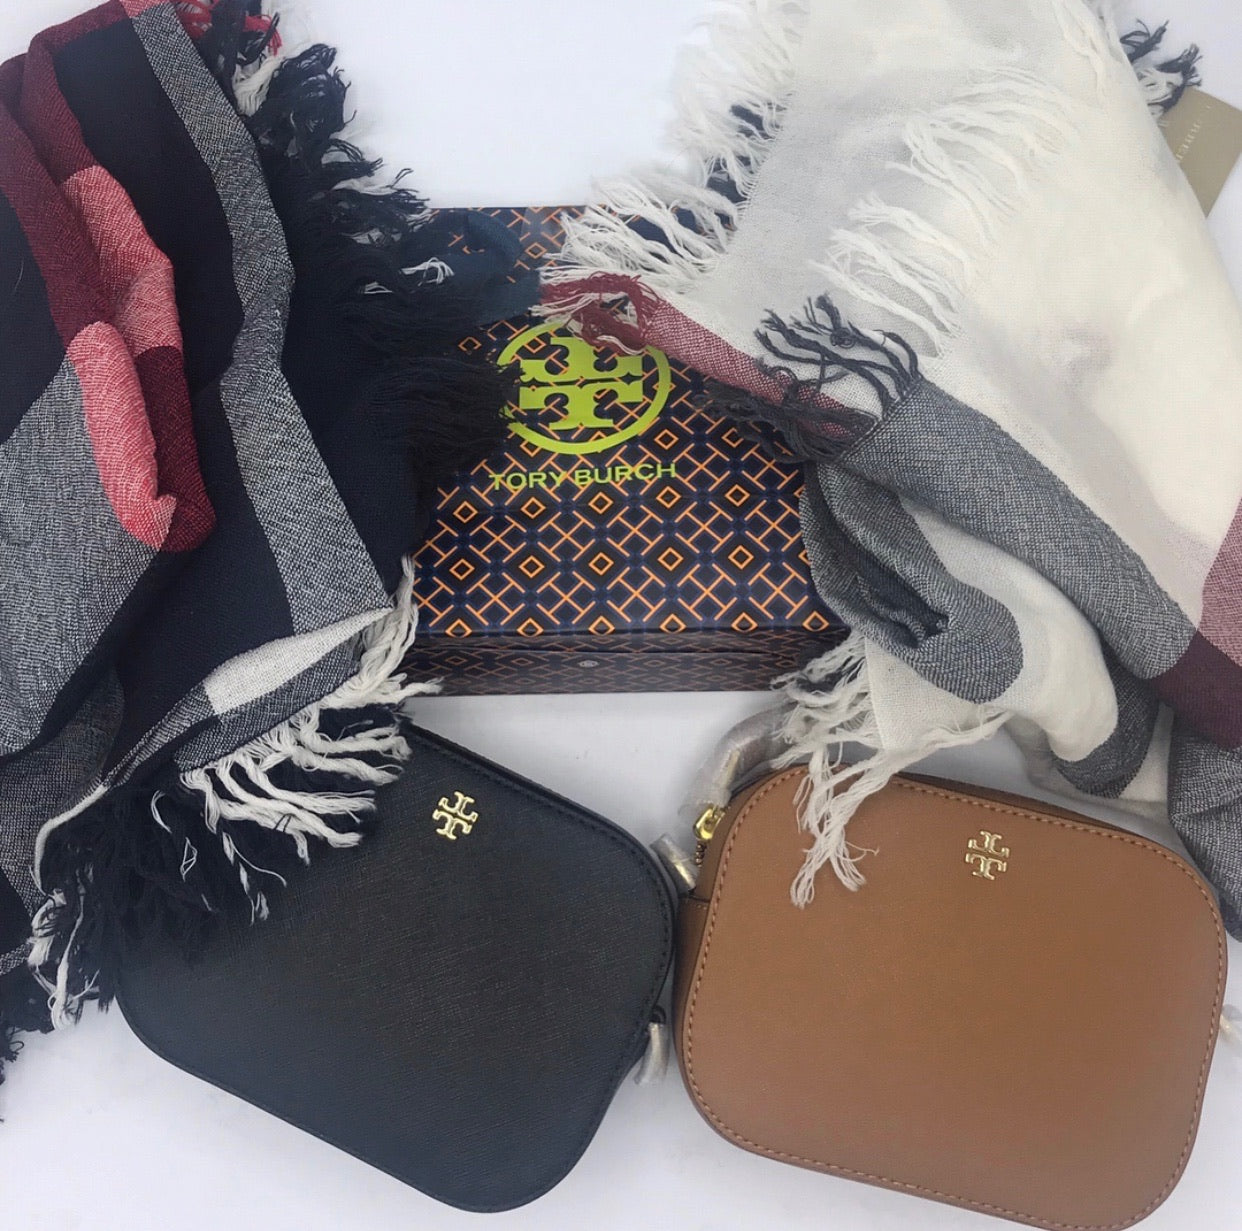 New Arrivals Tory Burch & Burberry